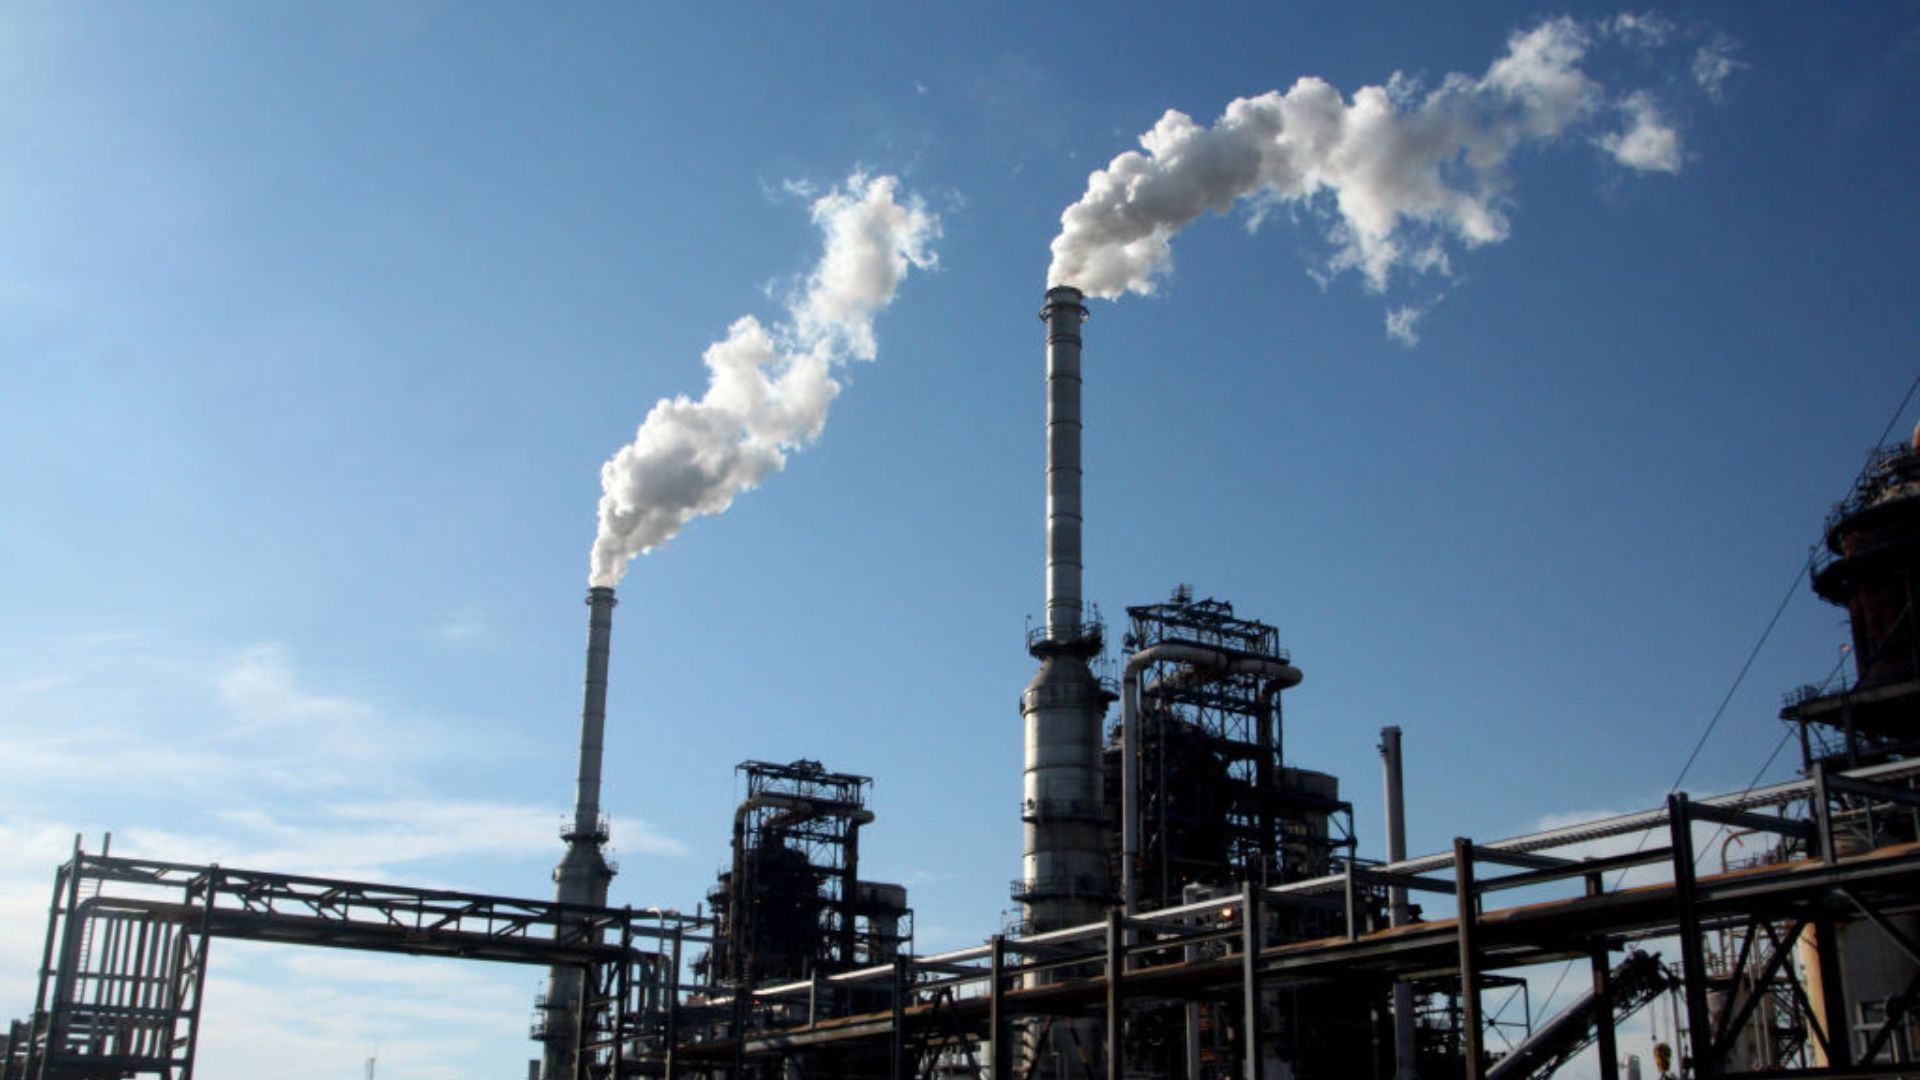 Industrial Plant Emissions Alt Text: An industrial plant with multiple tall chimneys emitting white smoke against a clear blue sky